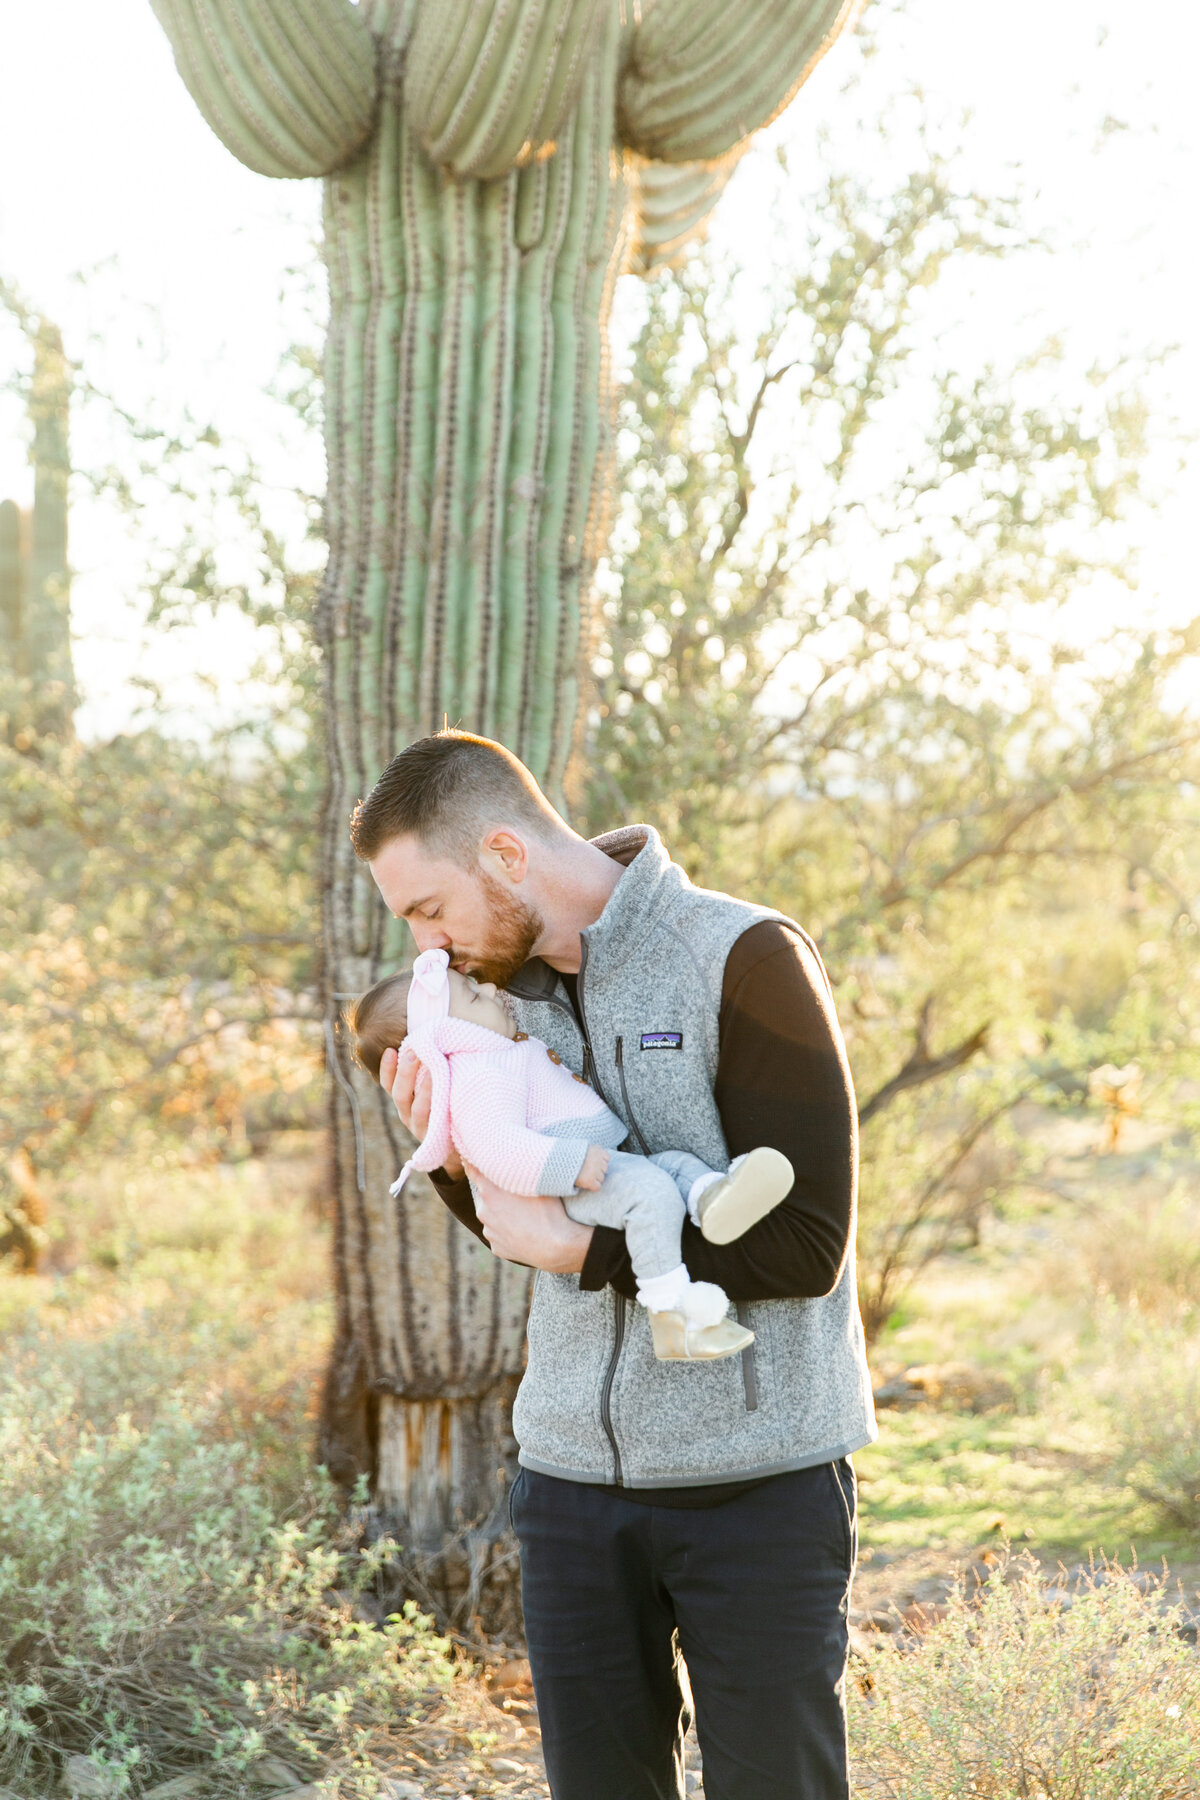 Karlie Colleen Photography - Scottsdale Family Photography - Lauren & Family-100